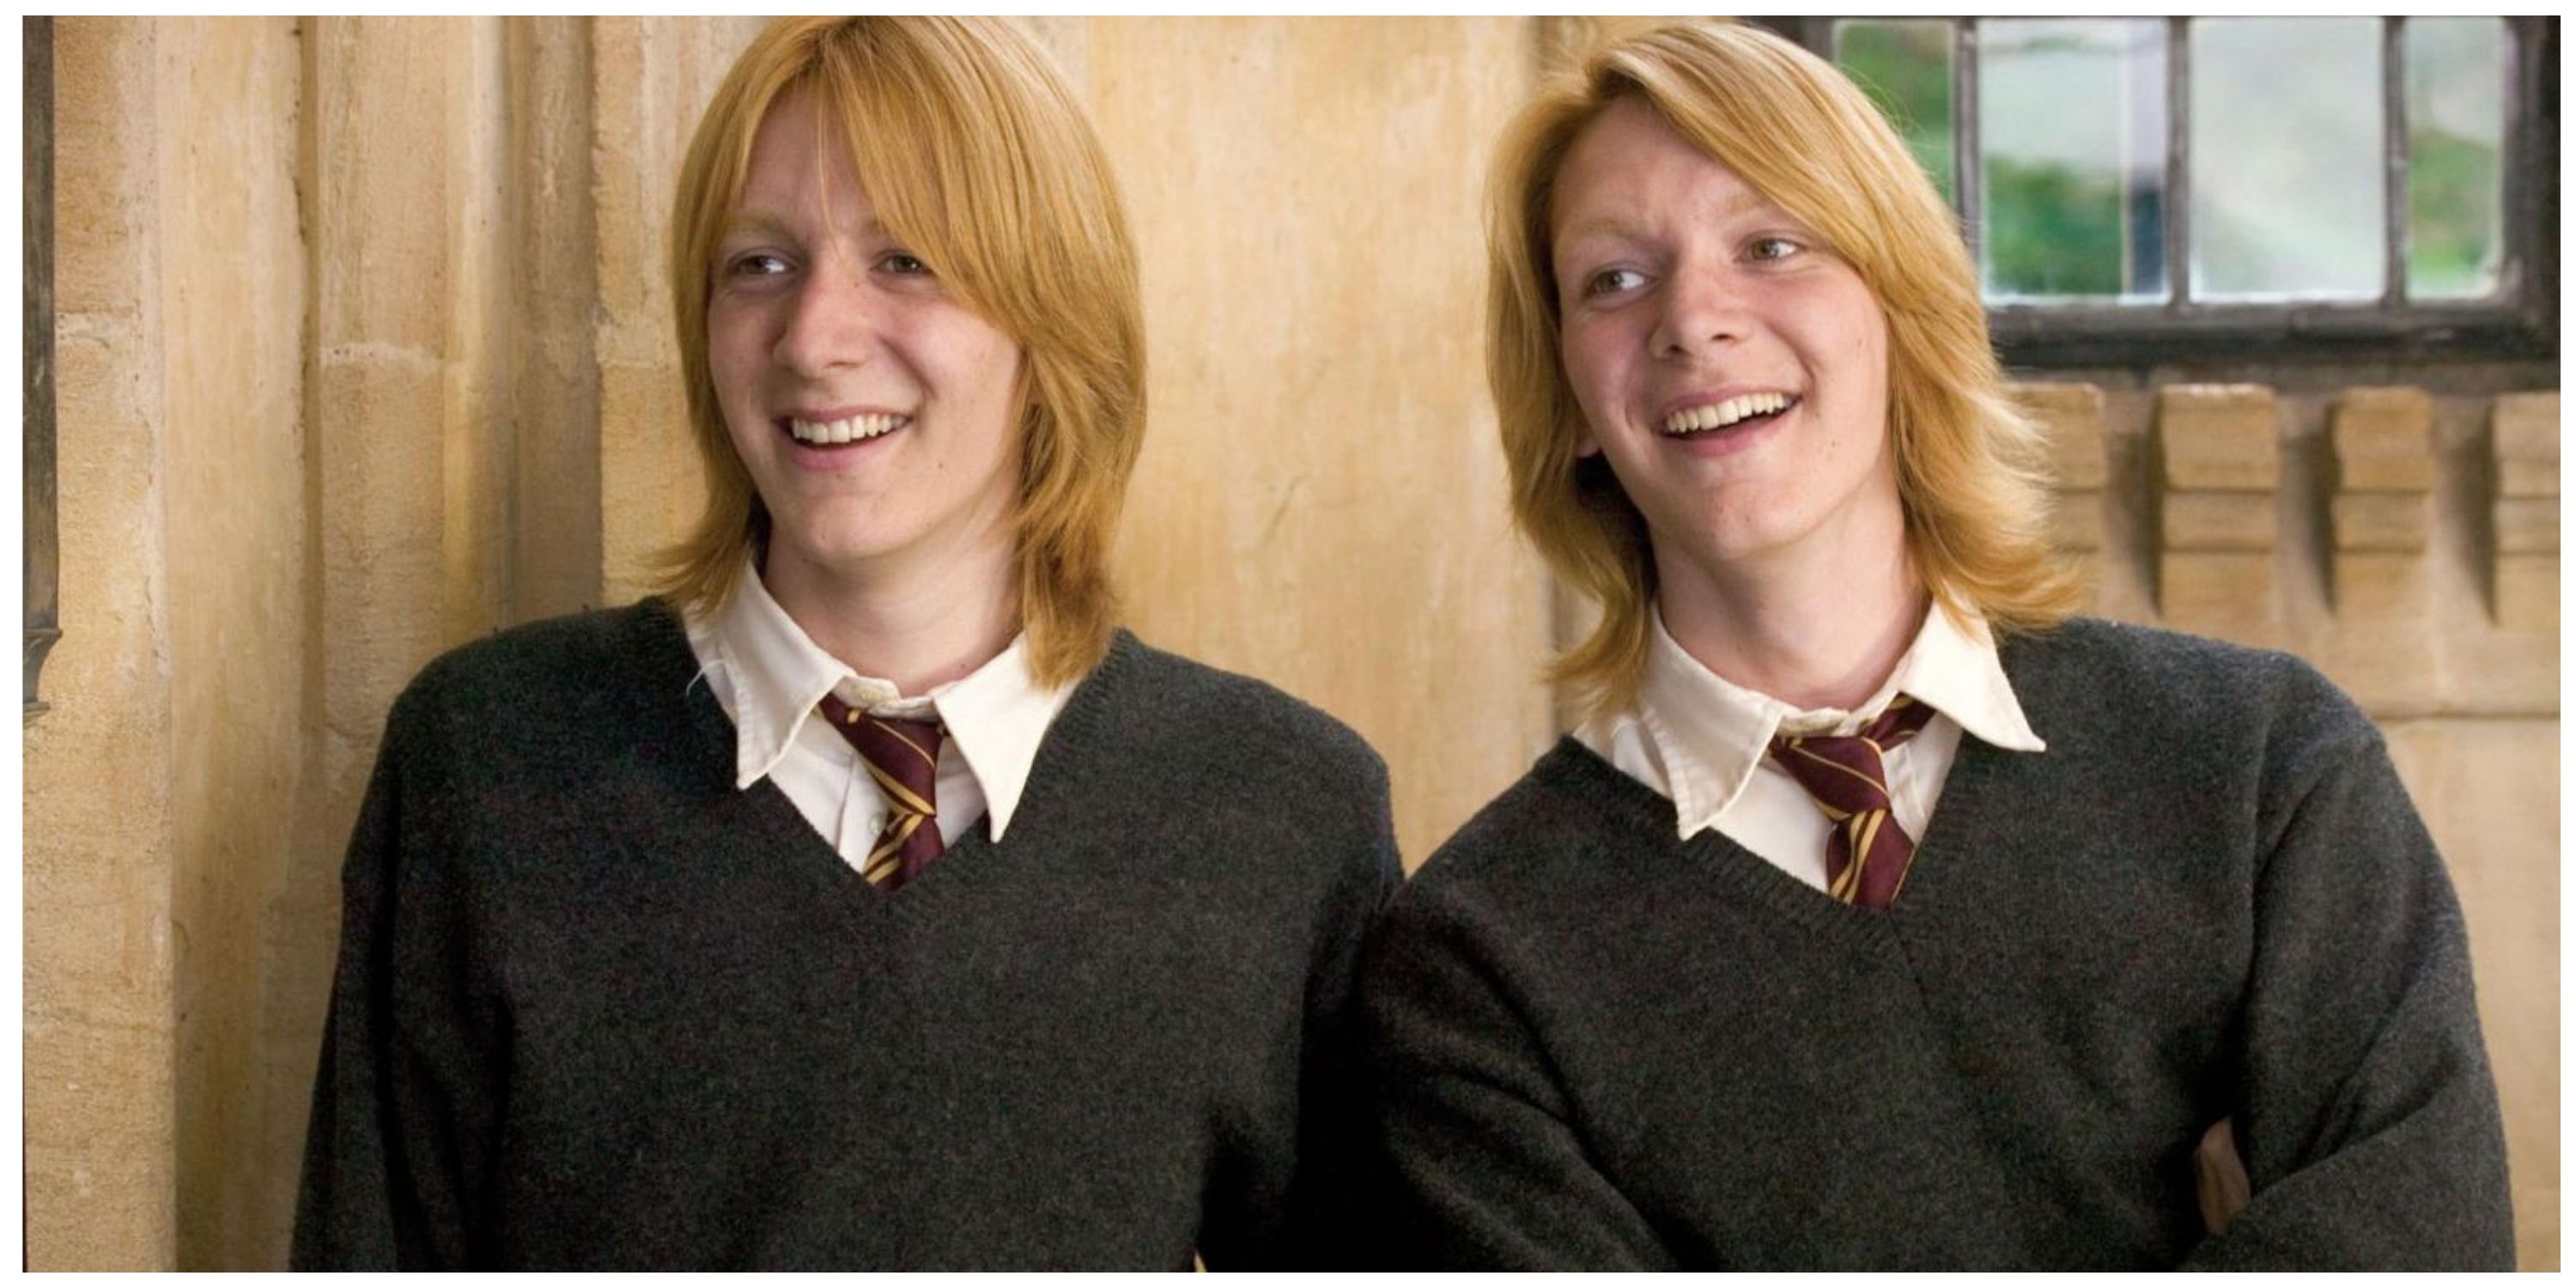 Fred and George Weasley Laugh in Goblet of Fire